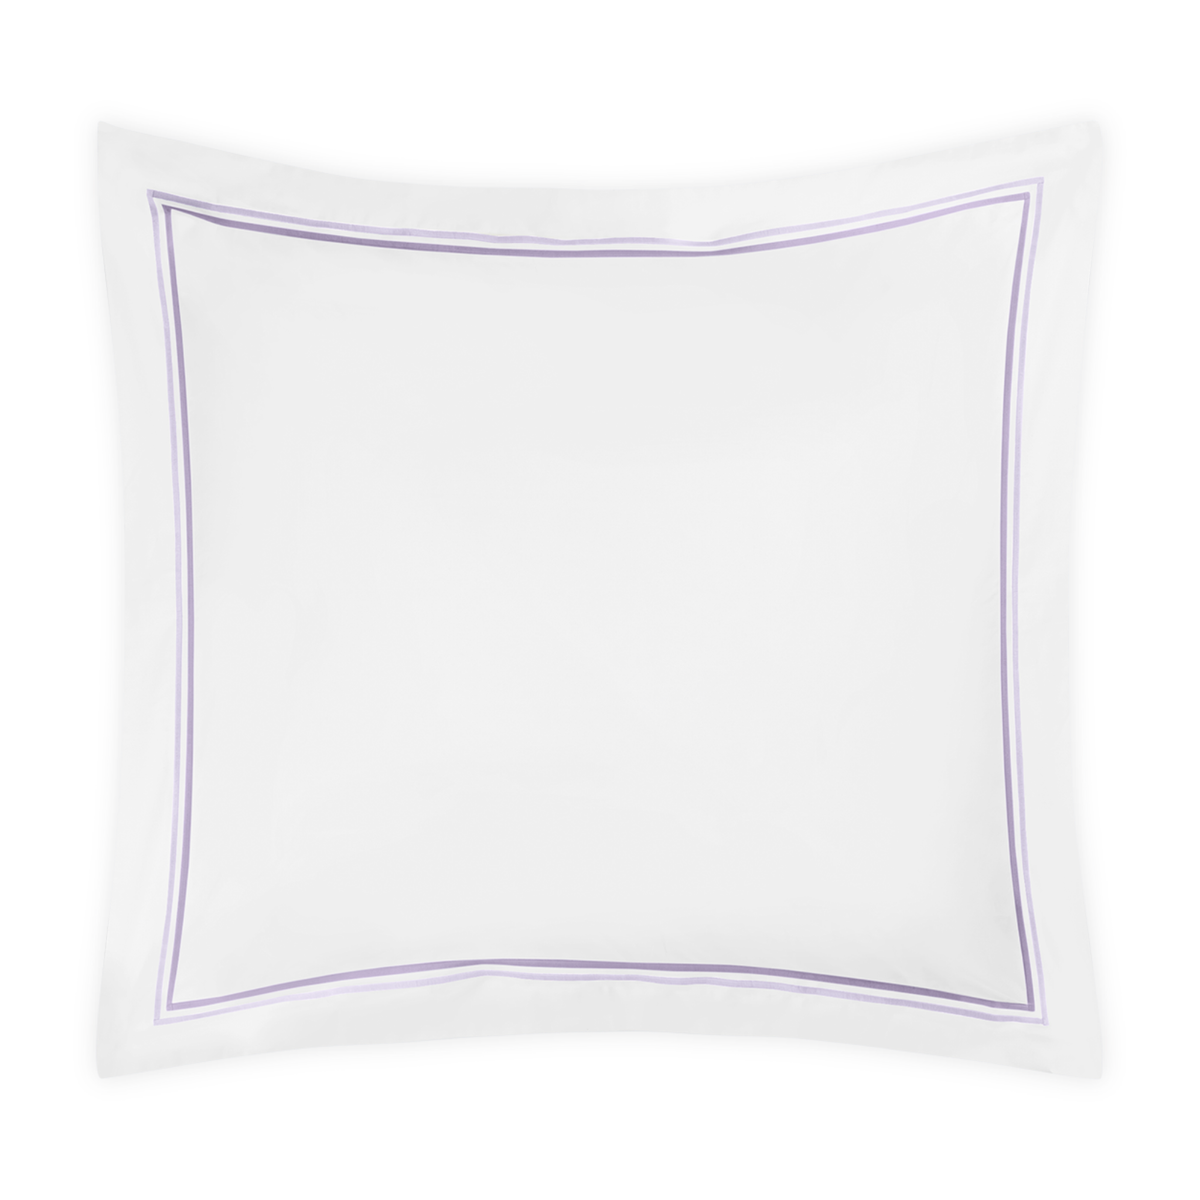 Euro Sham of Matouk Essex Bedding Collection in Lilac Color